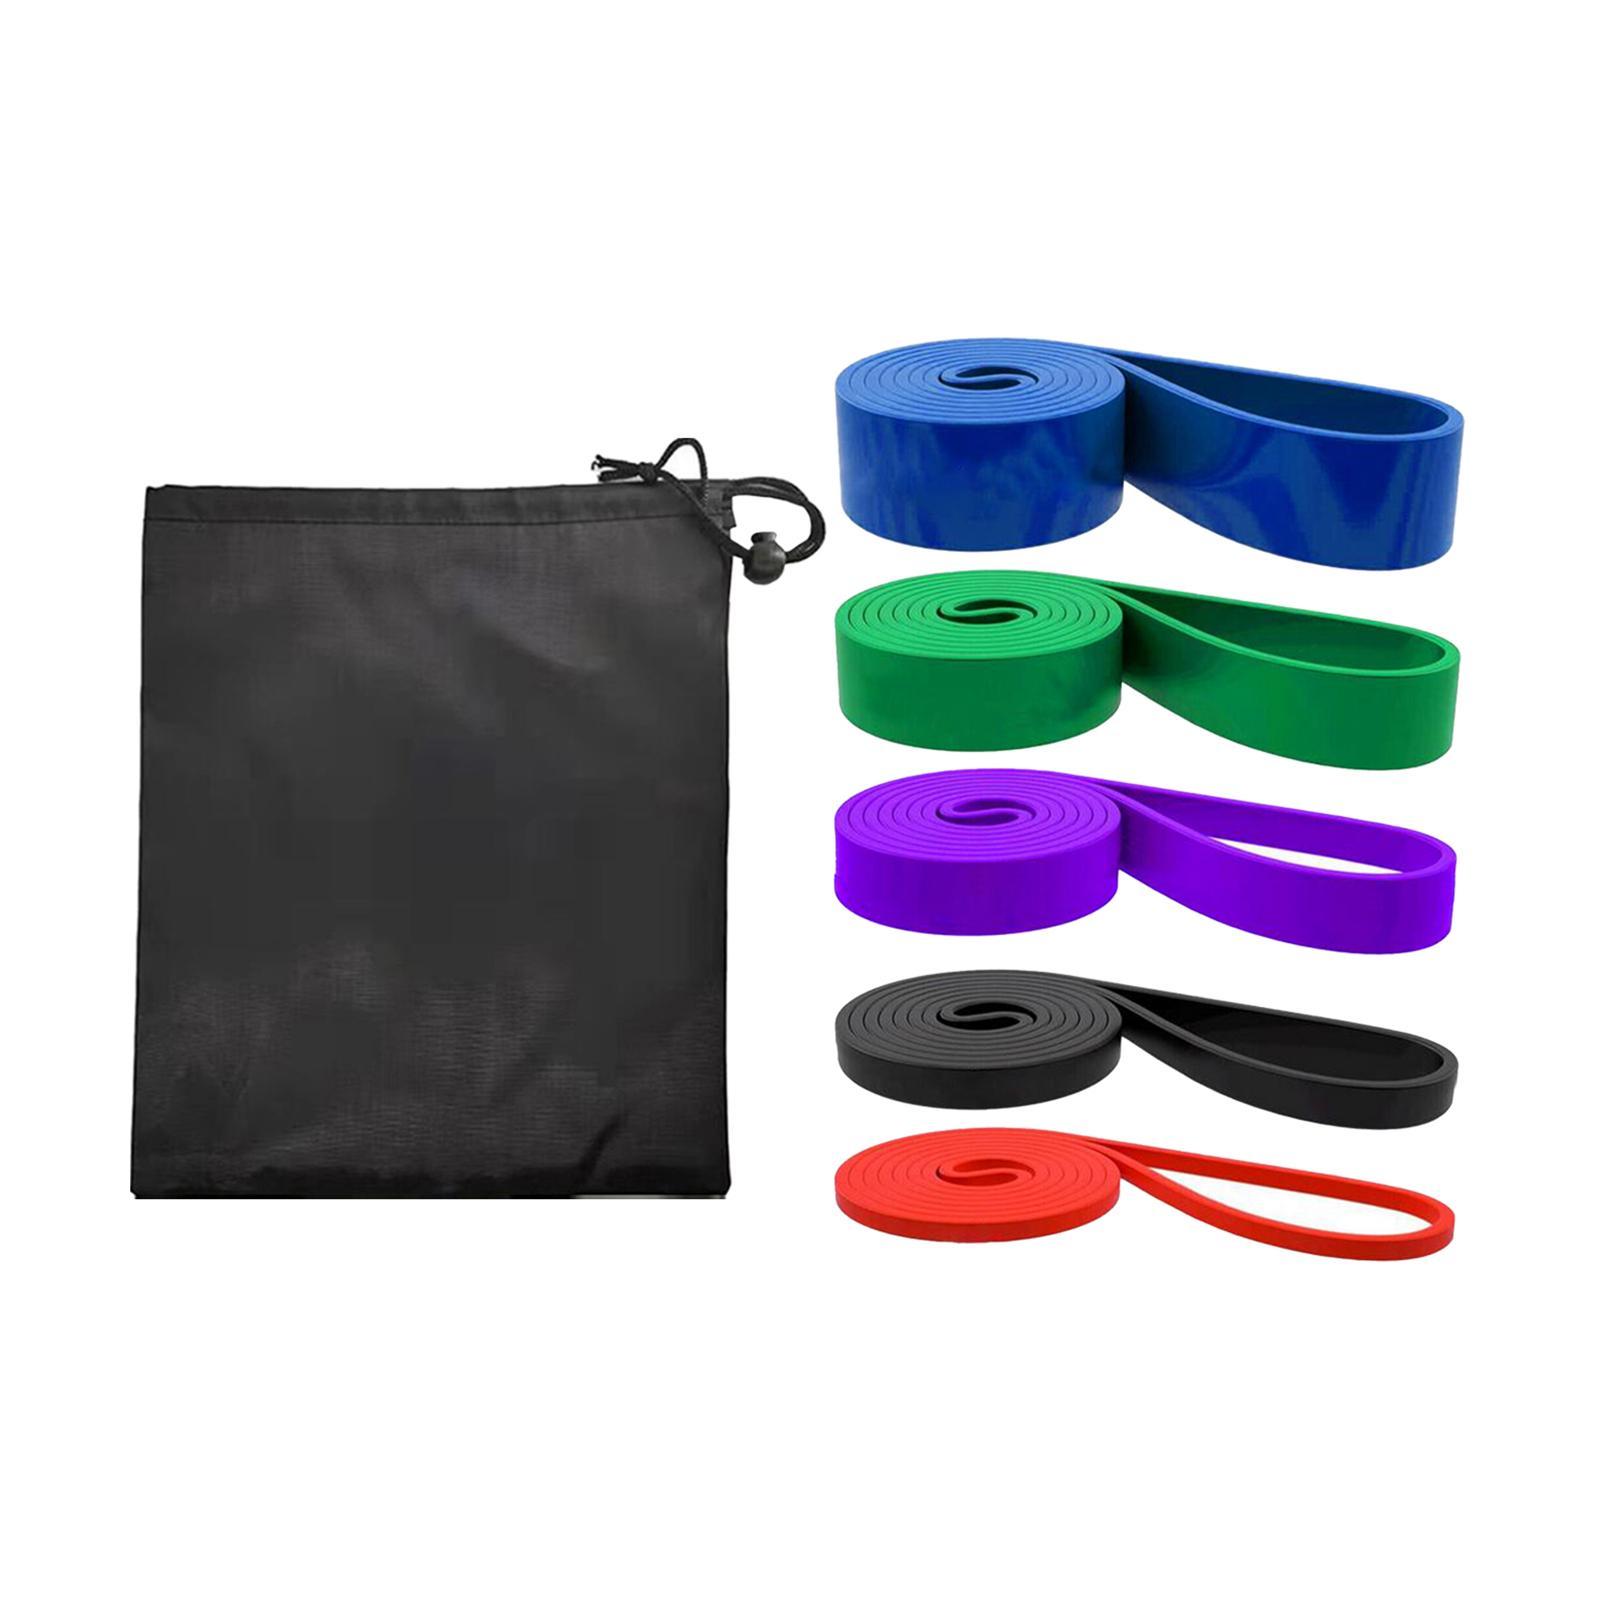 Resistance Bands Set Strength Training Workout Bands for Fitness Working Out